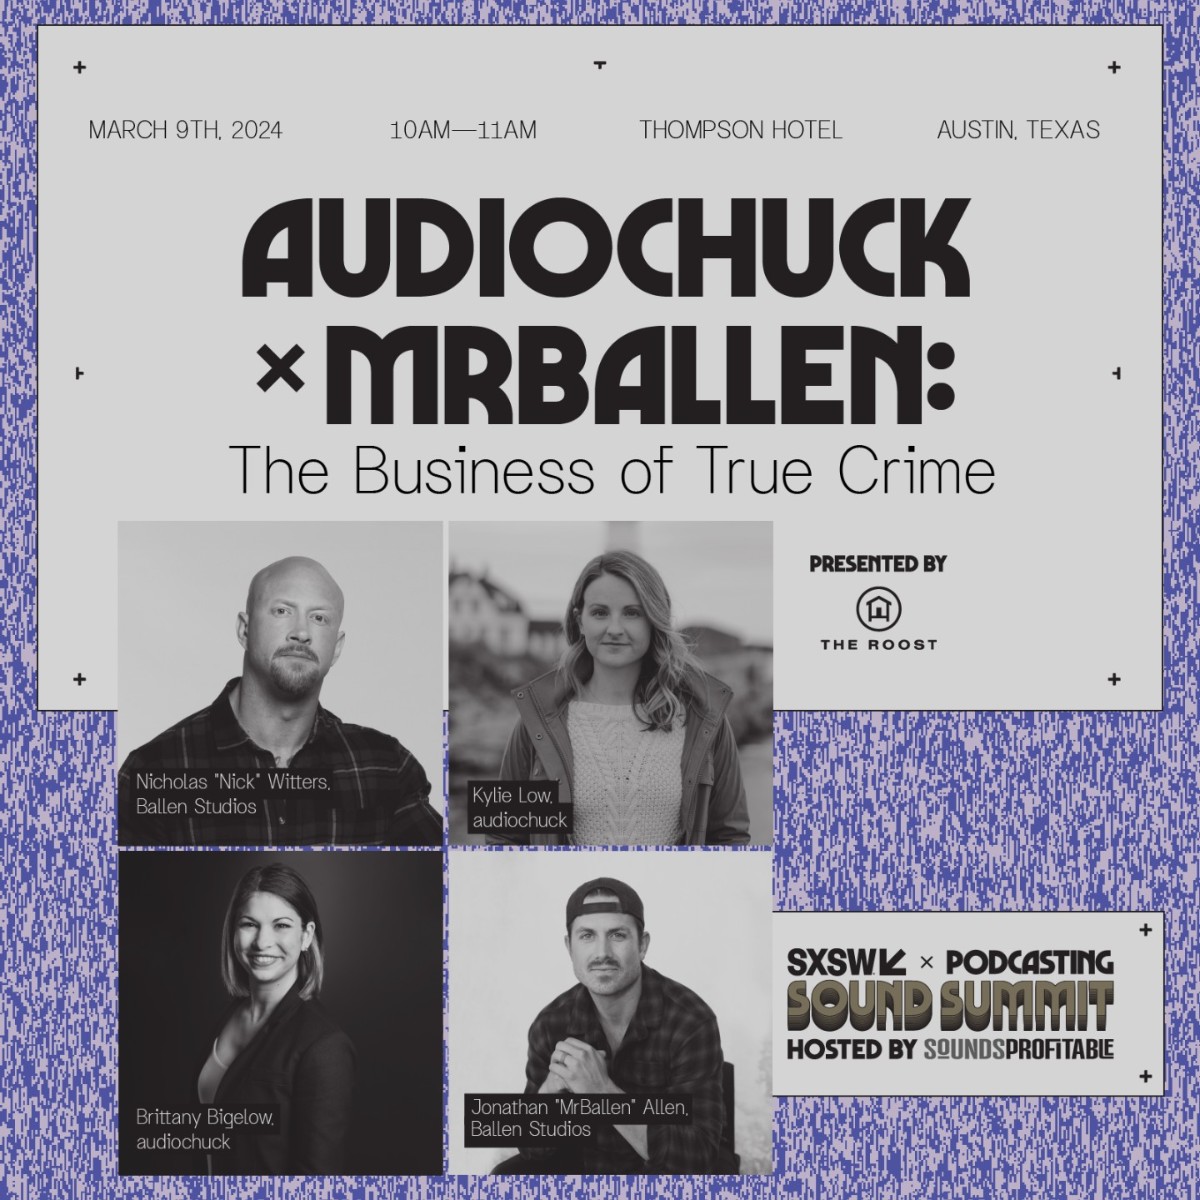 Two of our audiochuck team members, including @DarkDowneastPod host Kylie Low, will be attending Sound Summit at @SXSW 2024! AND with @MrBallen!! Talk about a crossover 🔥🎧